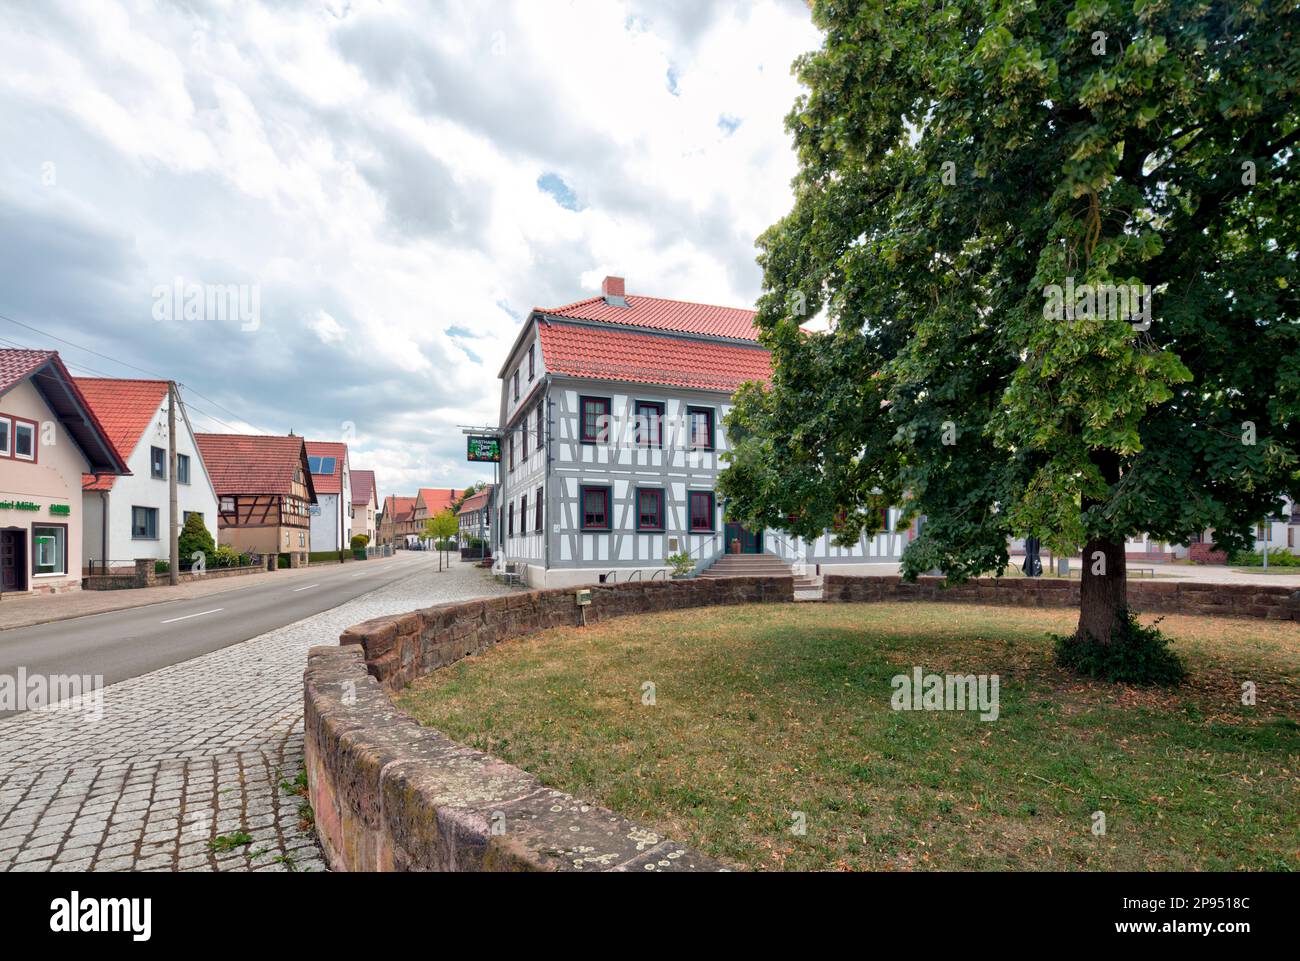 Inn, Zur Linde, half-timbered house, house facade, half-timbering, historical, Breitungen, Werra, Thuringia, Germany, Stock Photo